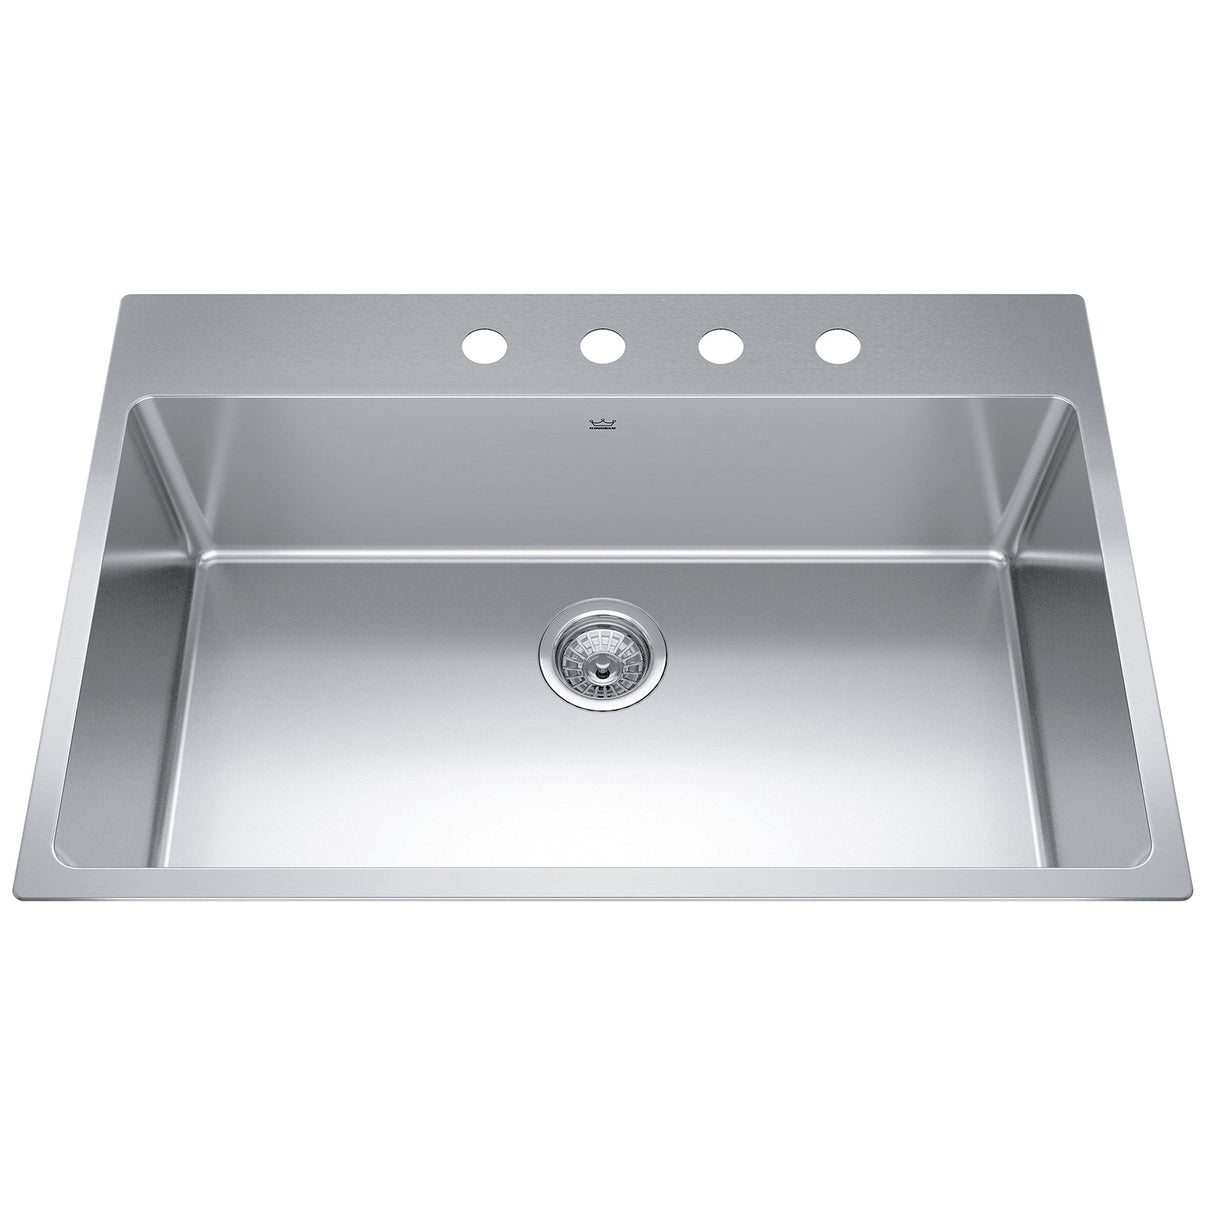 KINDRED BSL2233-9-4N Brookmore 32.9-in LR x 22.1-in FB x 9-in DP Drop in Single Bowl Stainless Steel Sink In Commercial Satin Finish